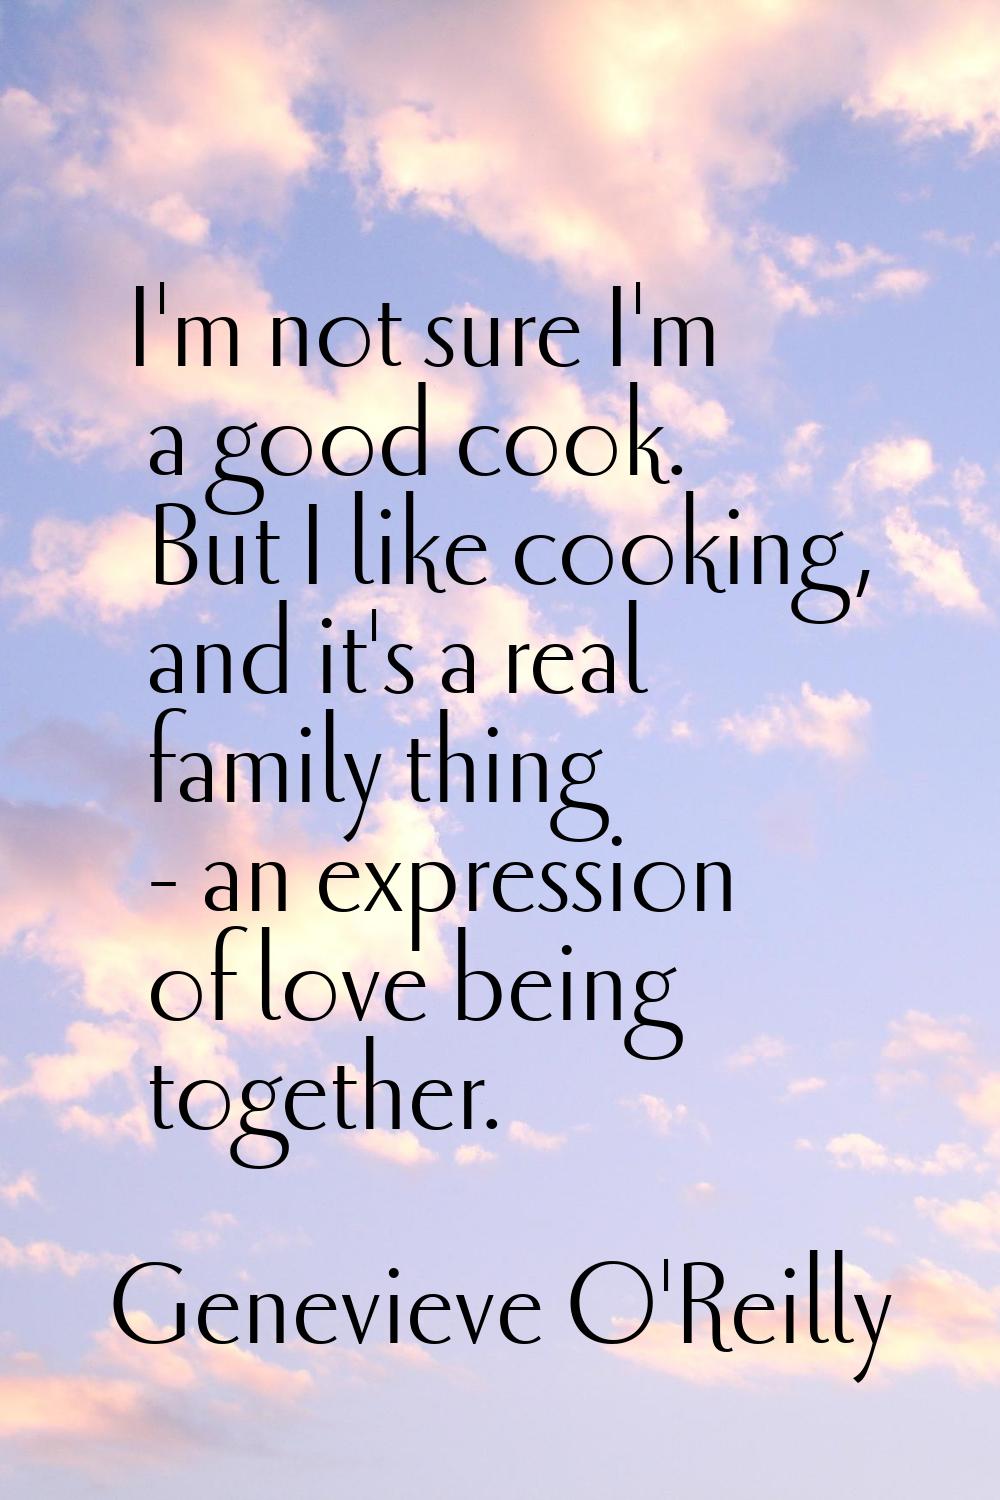 I'm not sure I'm a good cook. But I like cooking, and it's a real family thing - an expression of l